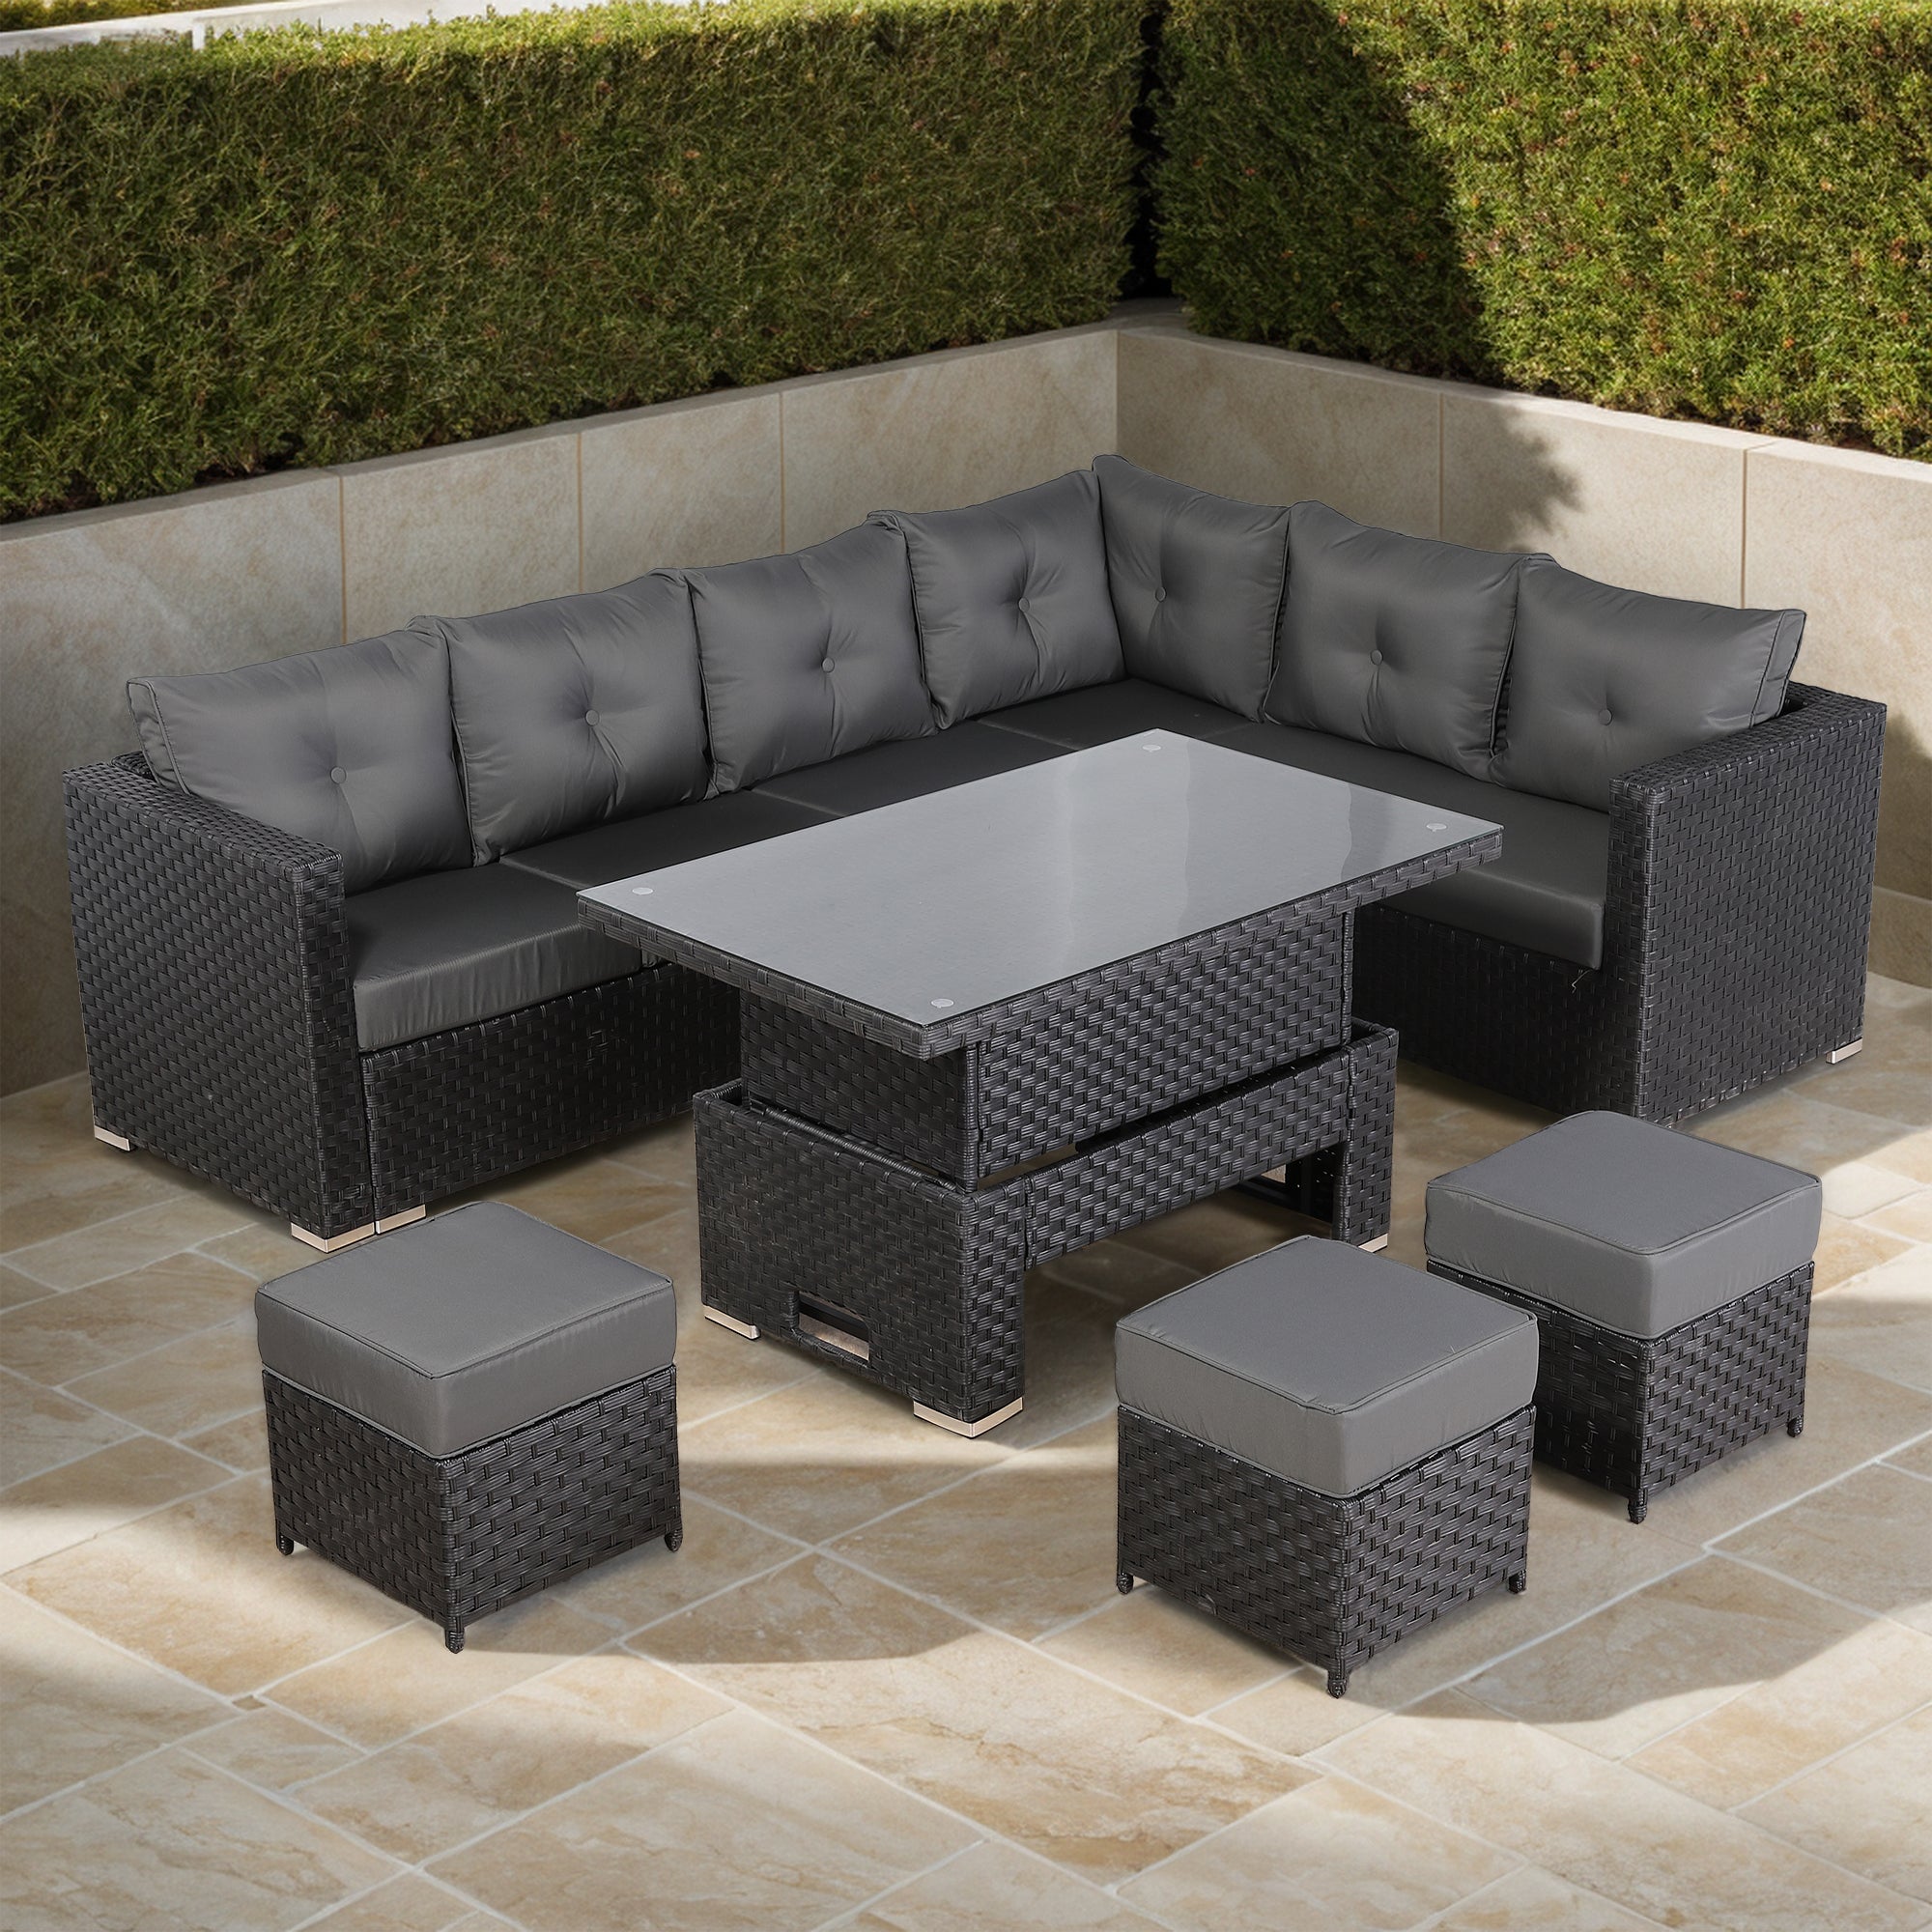 IN STOCK....Newick Modular Corner Sofa With Rising Table And 3 Footstools In Black Weave(CS06)